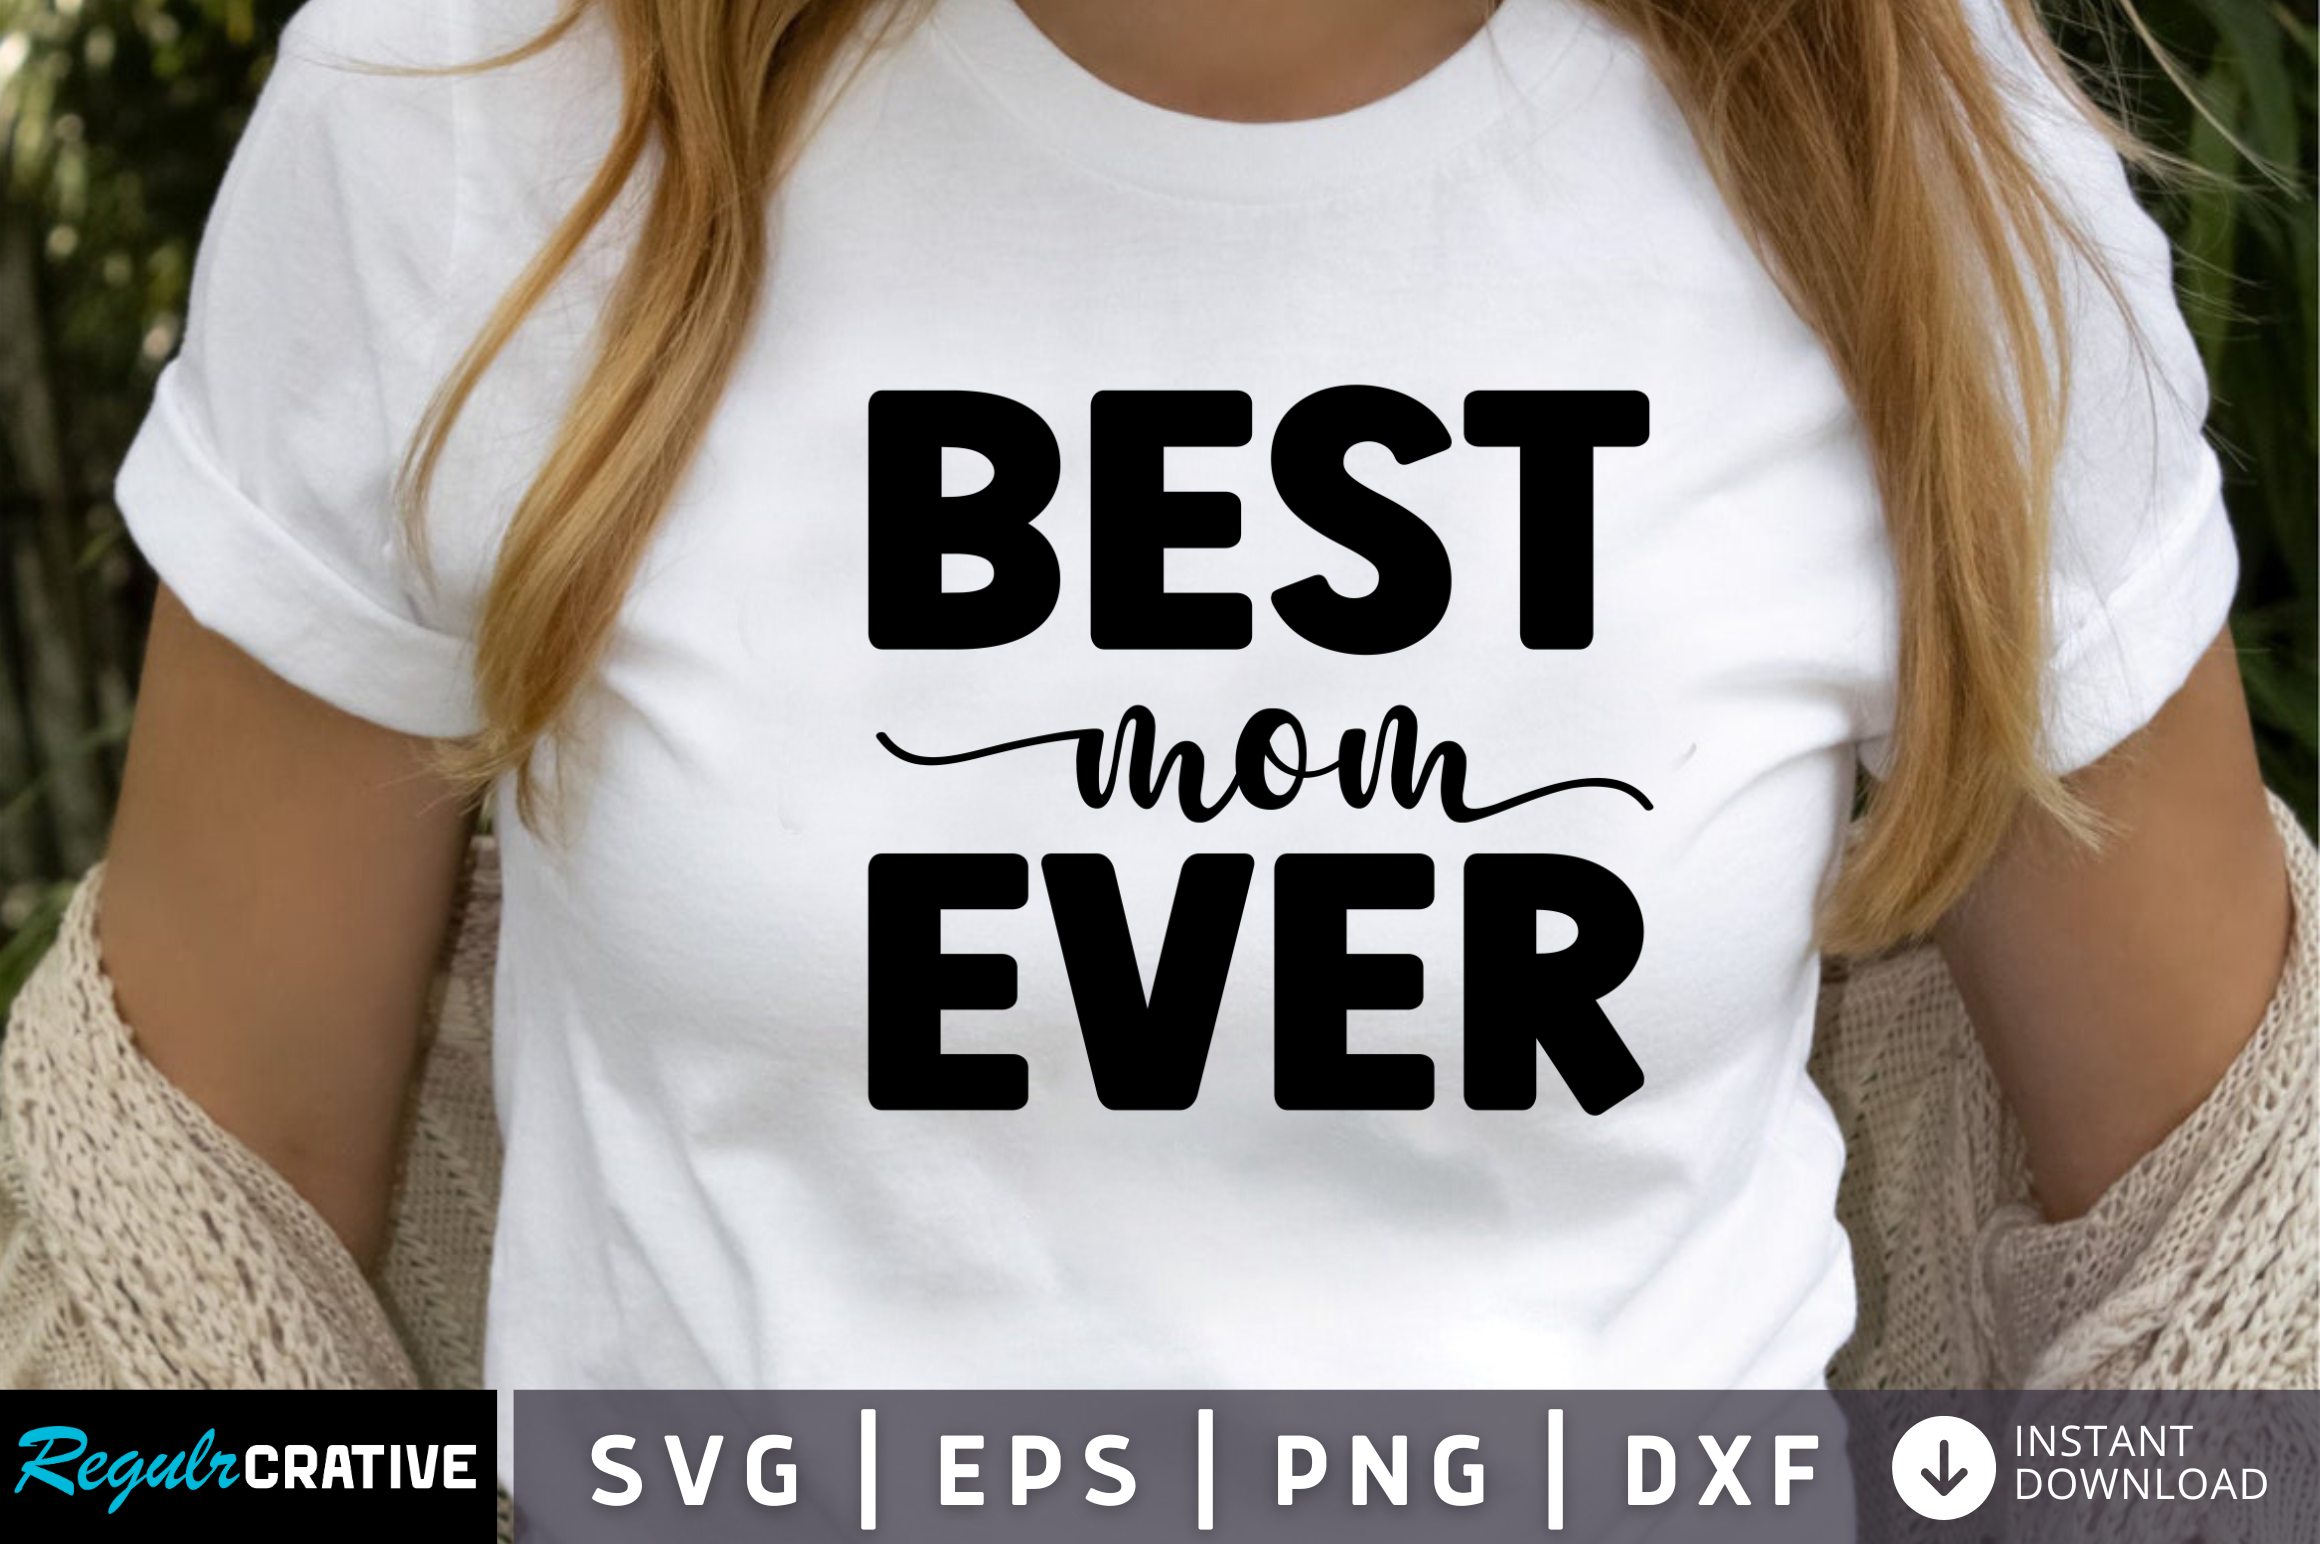 FREE Best Mom Ever Svg Graphic by Regulrcrative · Creative Fabrica